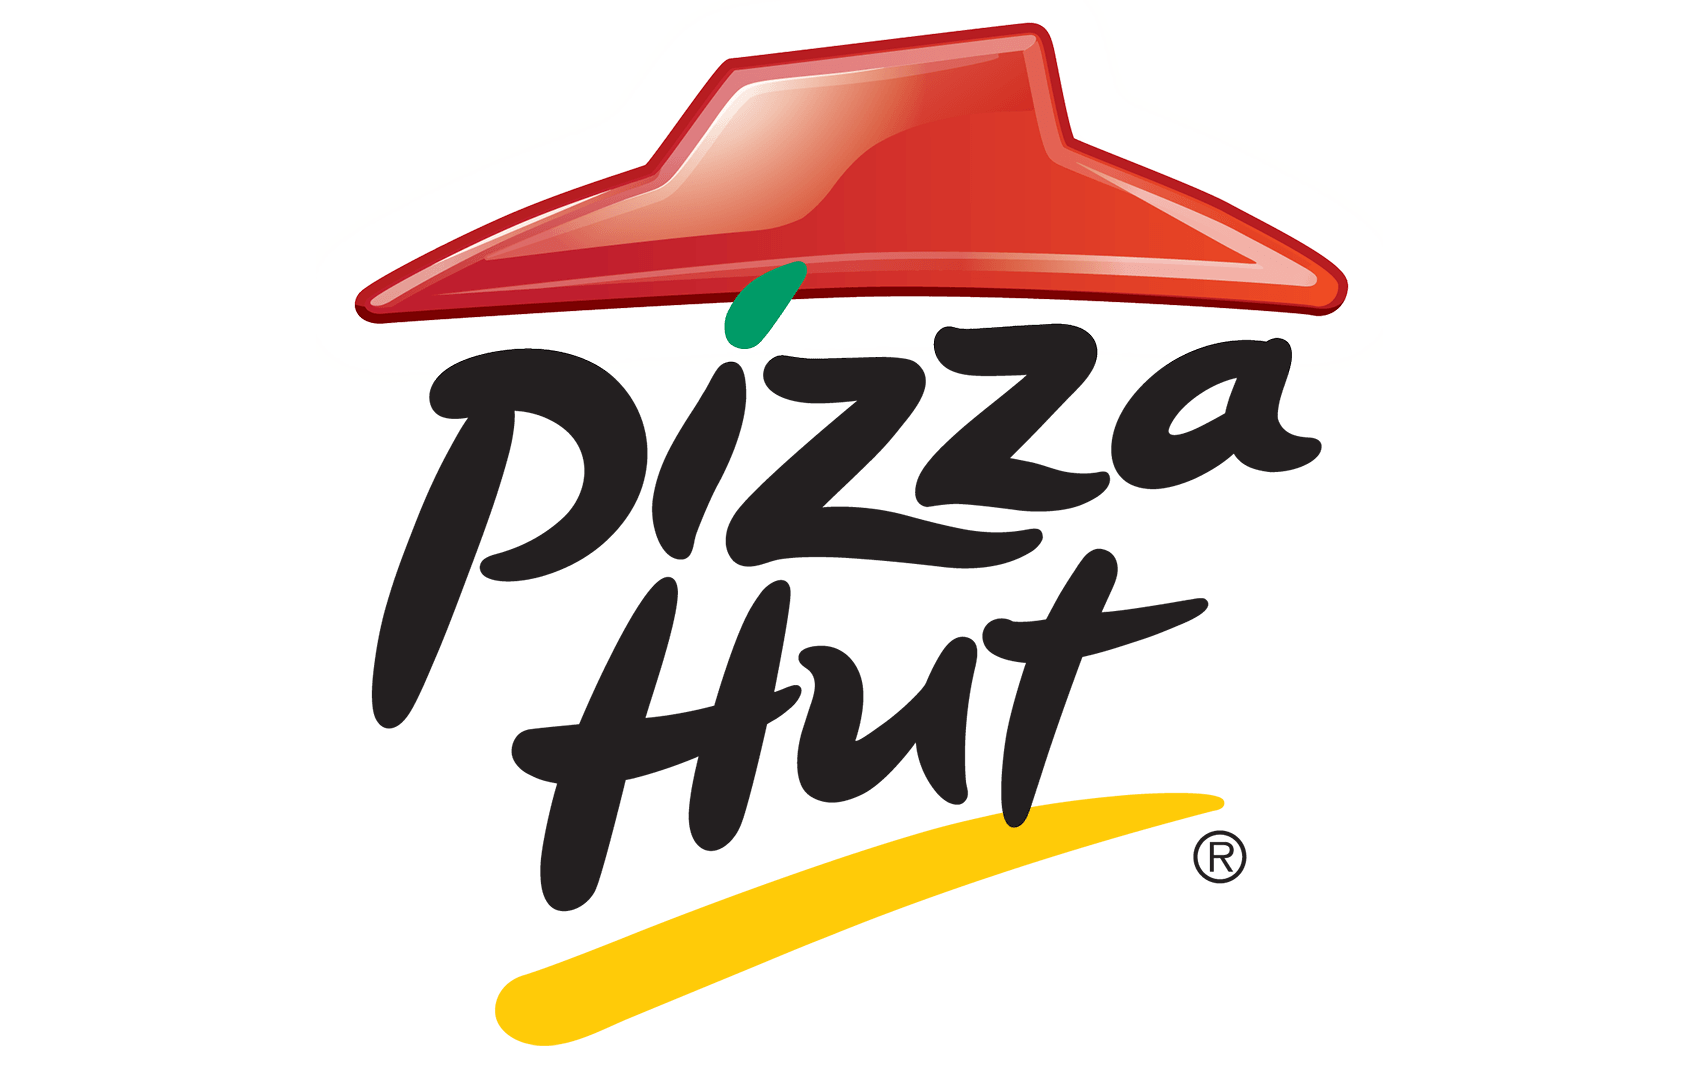 Pizza Hut 2018 Logo - Pizza Hut Logo, Pizza Hut Symbol, Meaning, History and Evolution